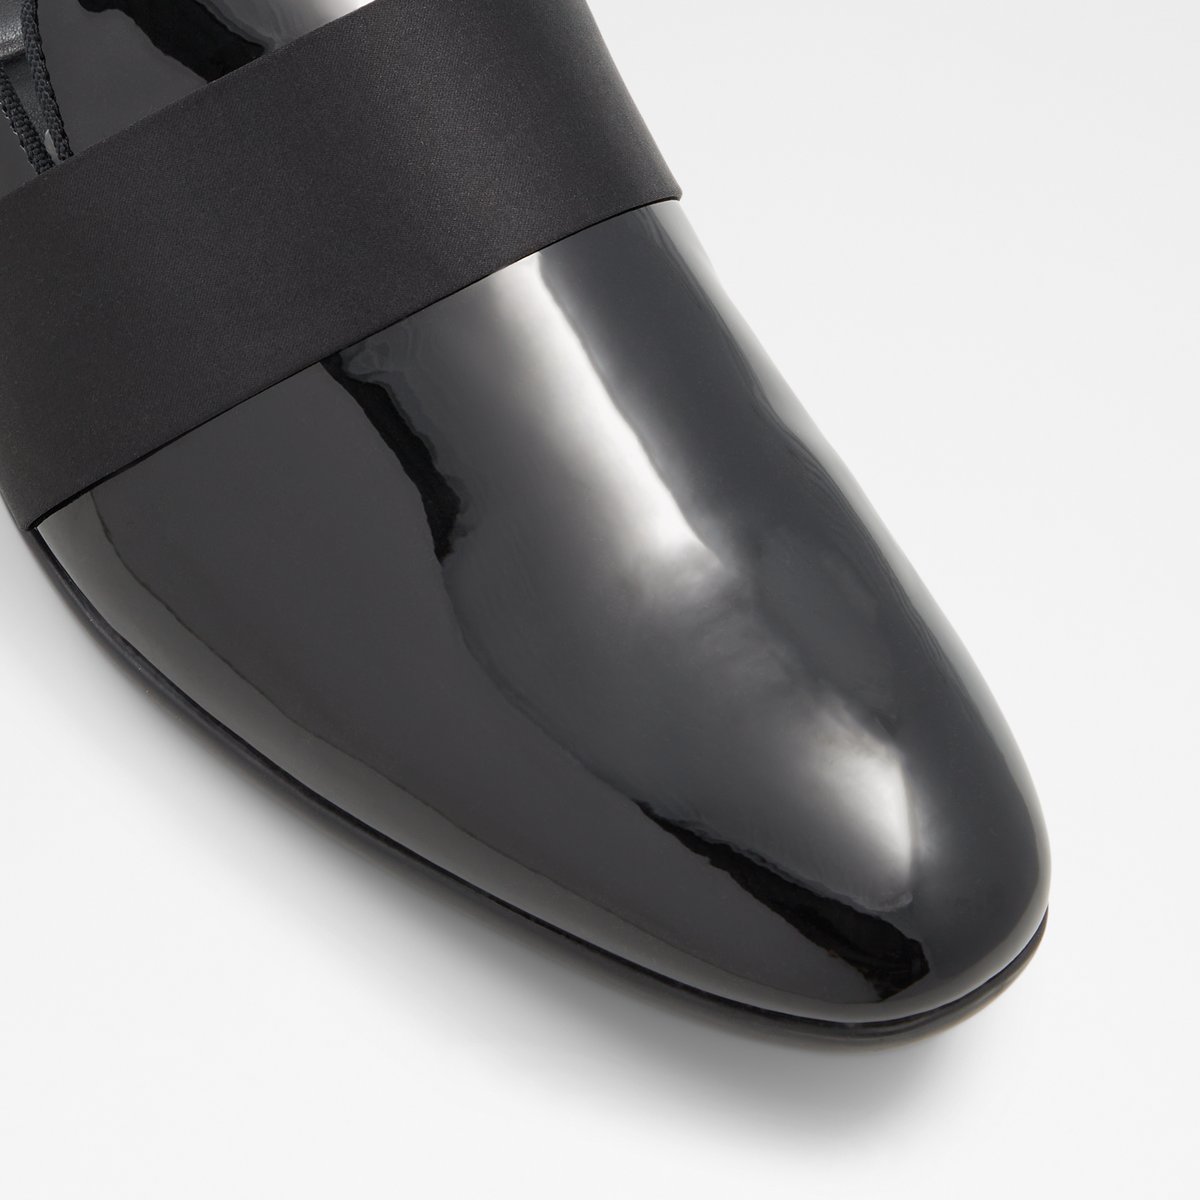 Asaria Black Synthetic Patent Men's Loafers & Slip-Ons | ALDO Canada